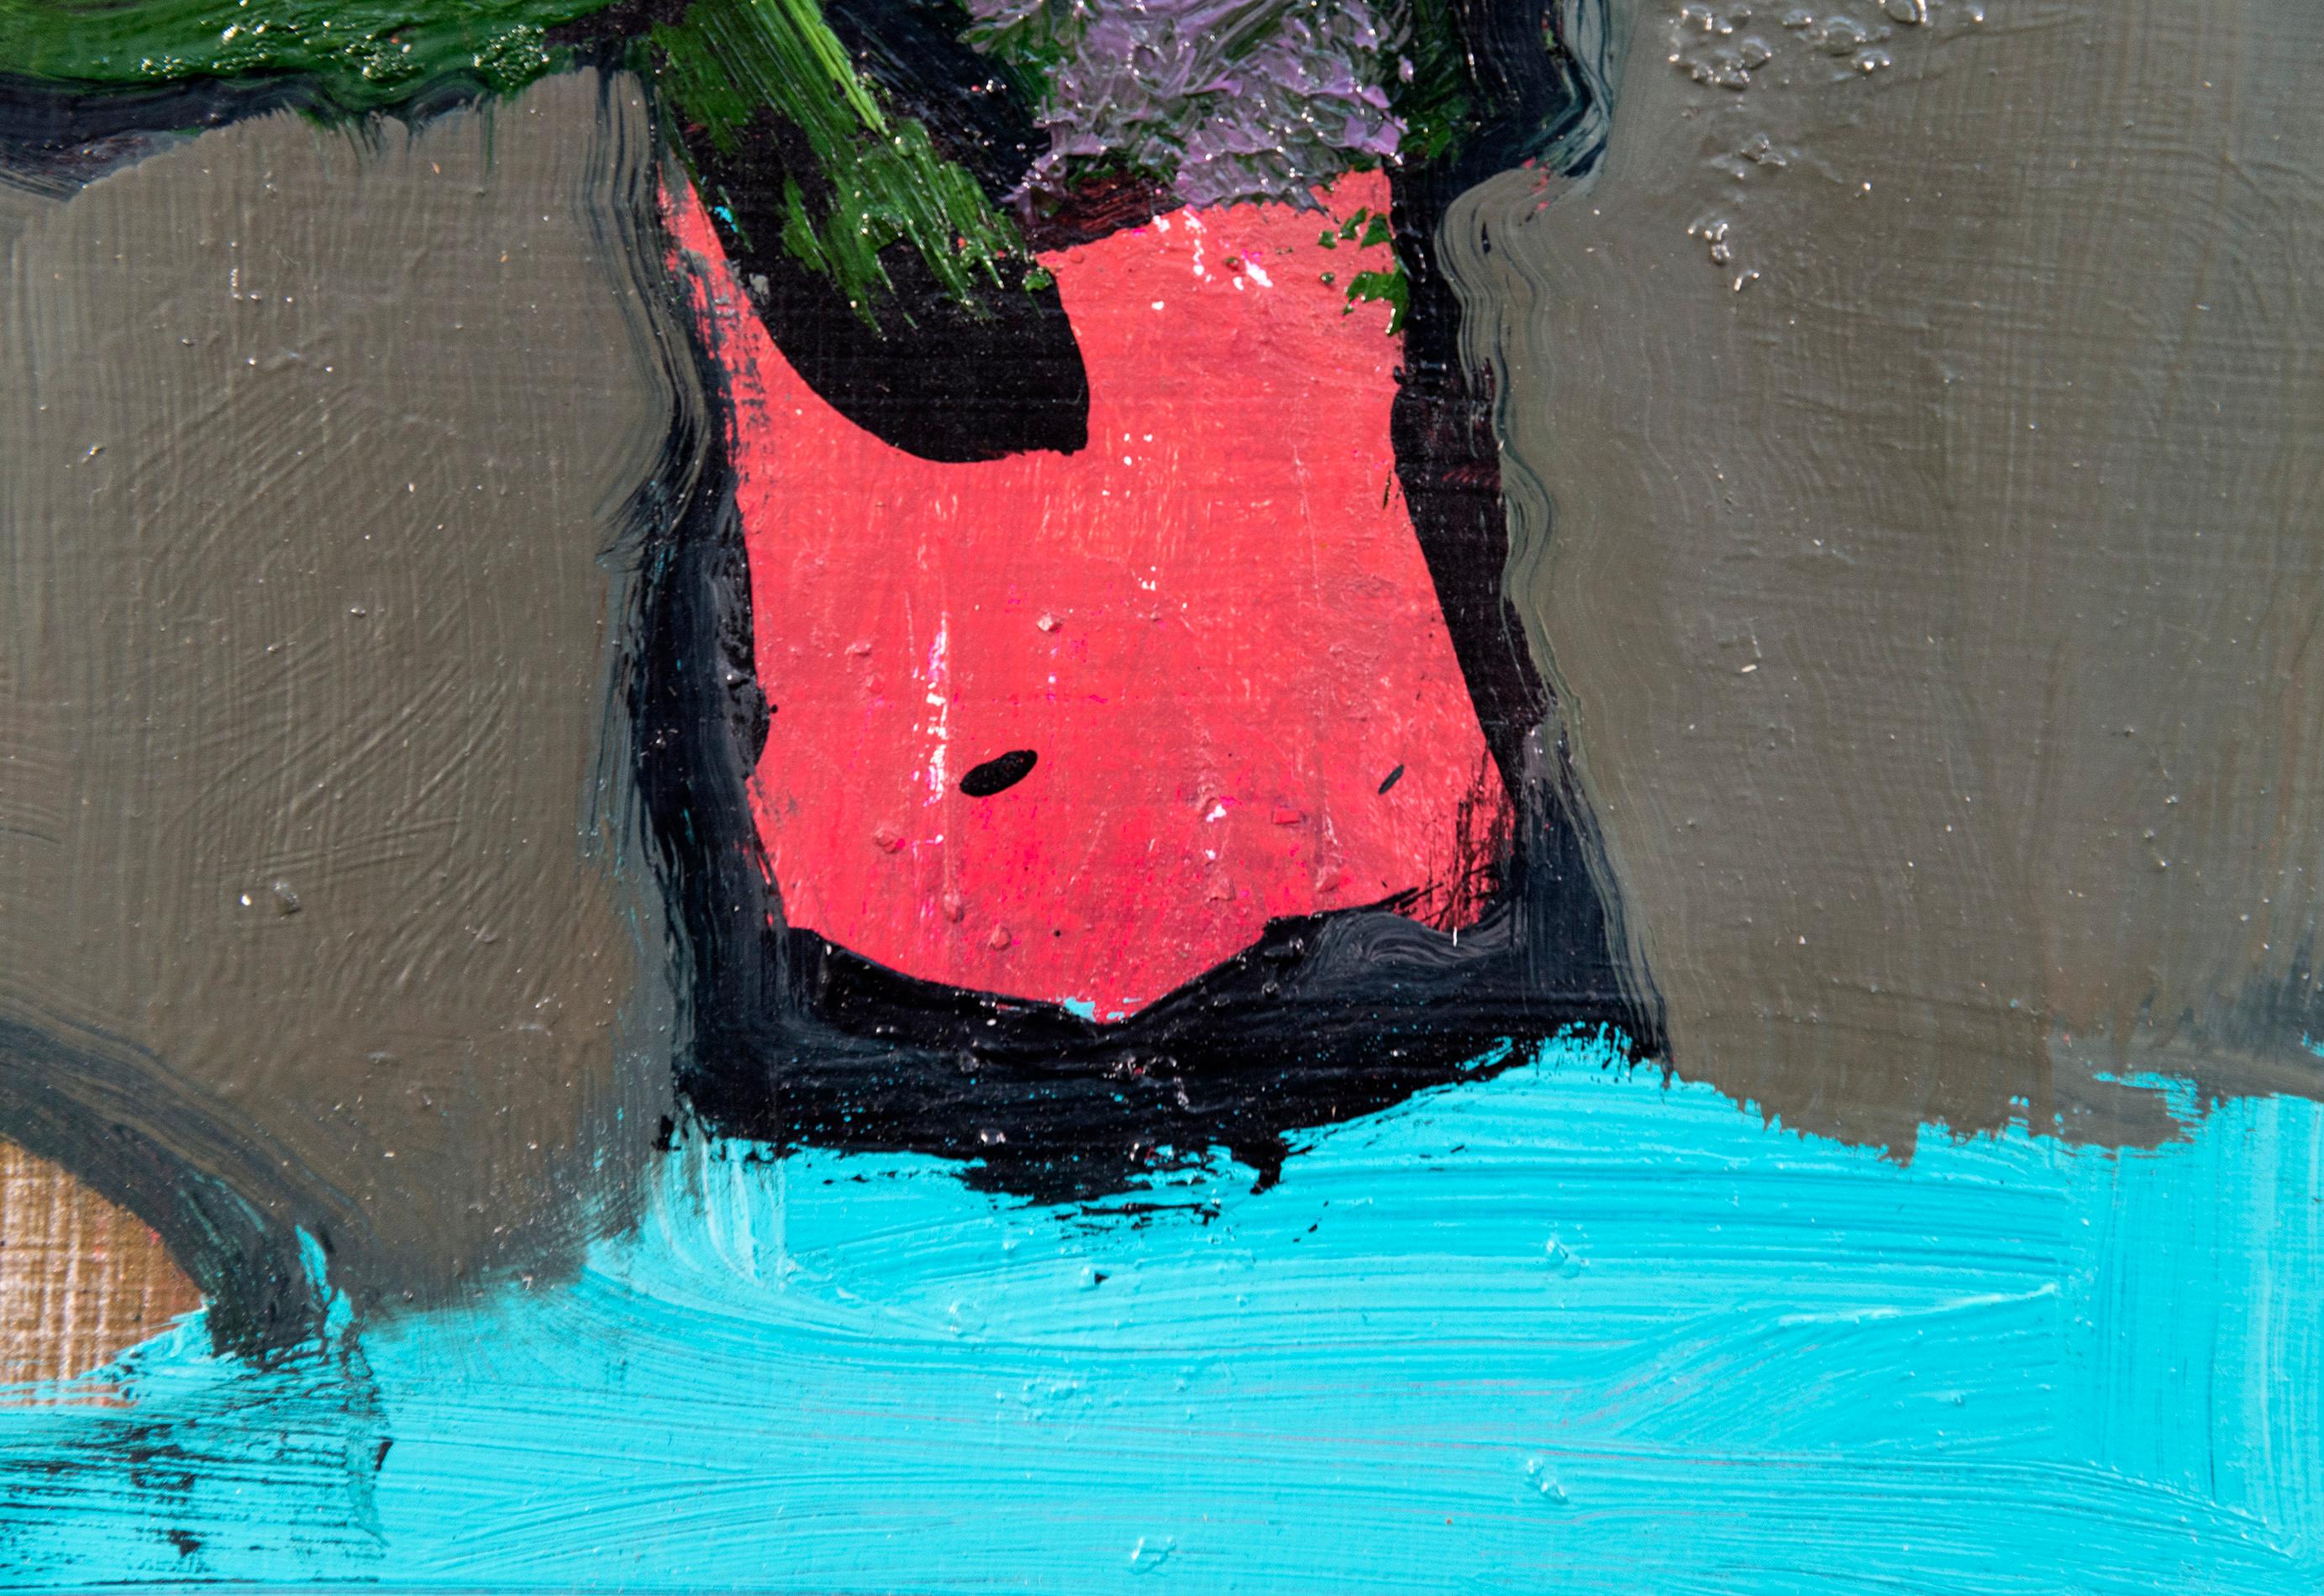 Manganese Blue with Neon - small, red, pink, floral, still life, oil on panel - Contemporary Painting by Jennifer Hornyak